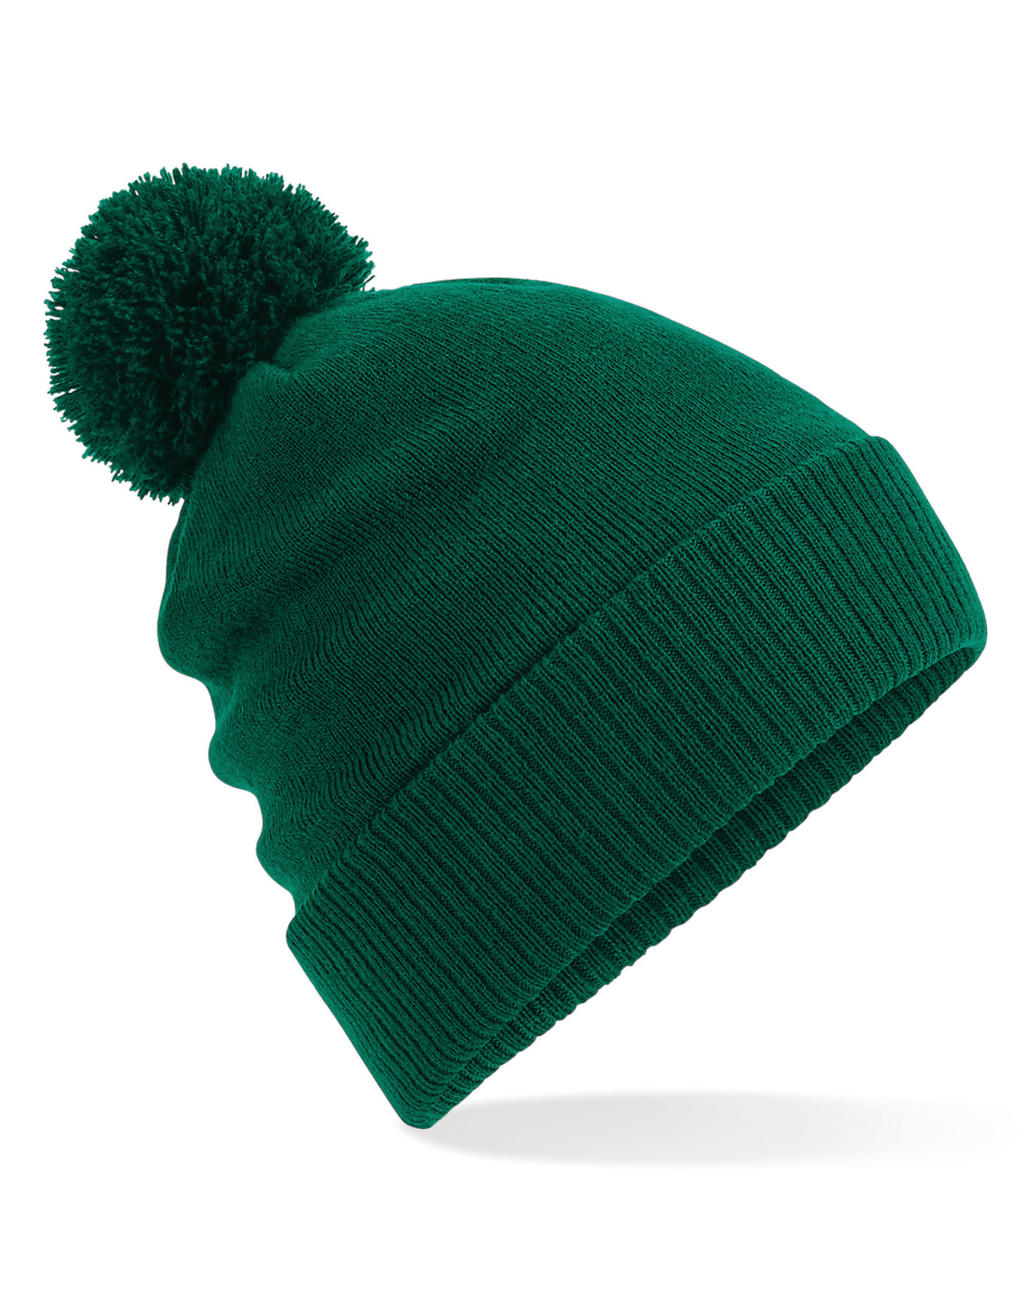  Thermal Snowstar? Beanie in Farbe Bottle Green